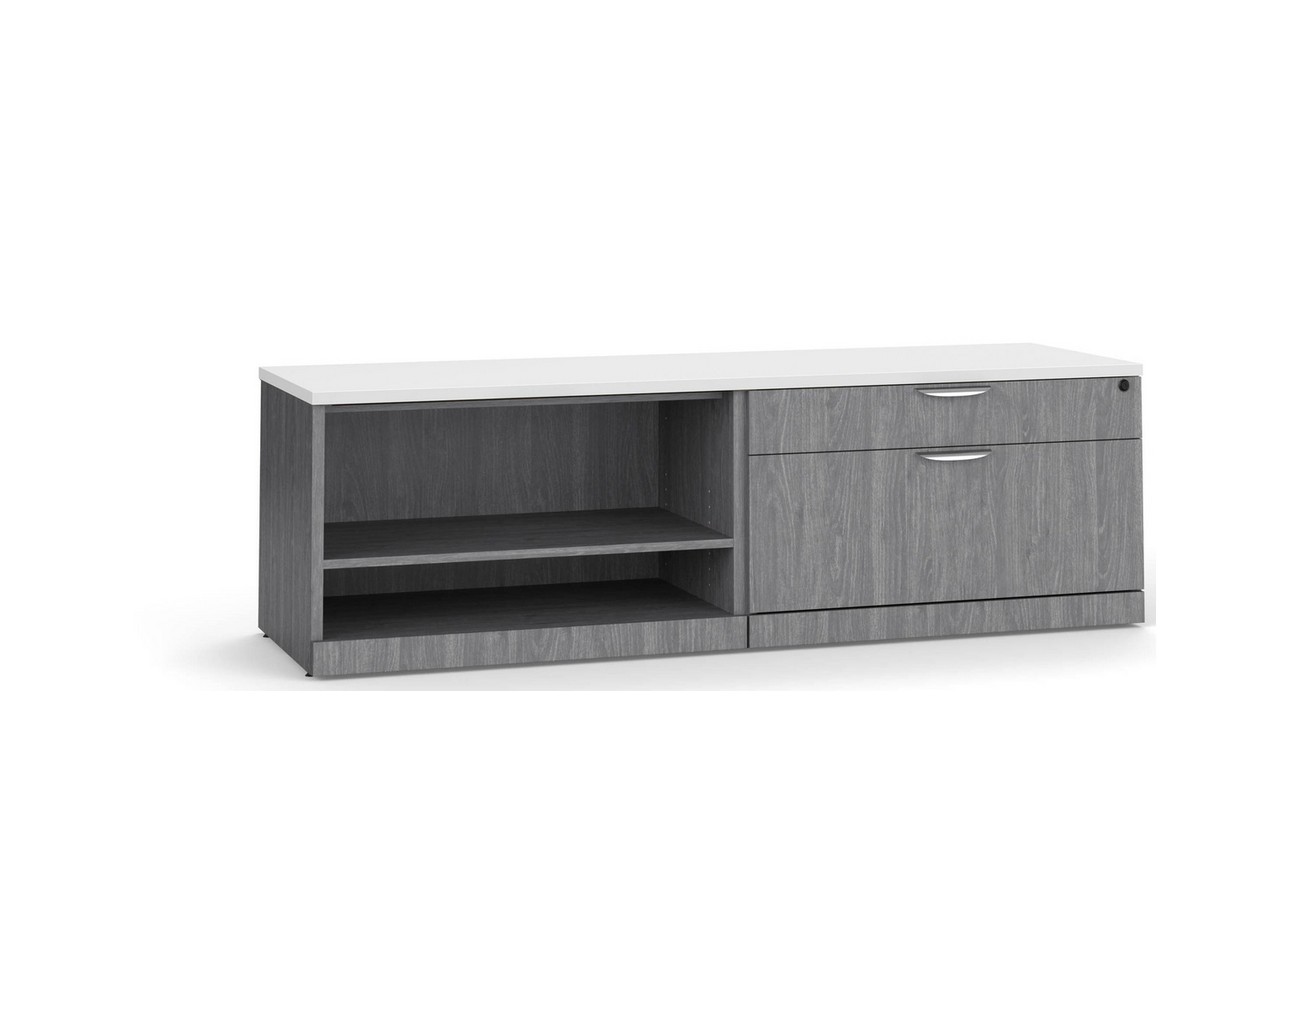 Elements Storage Cabinet and Bookshelf Credenza – NPG Base and WHT Top